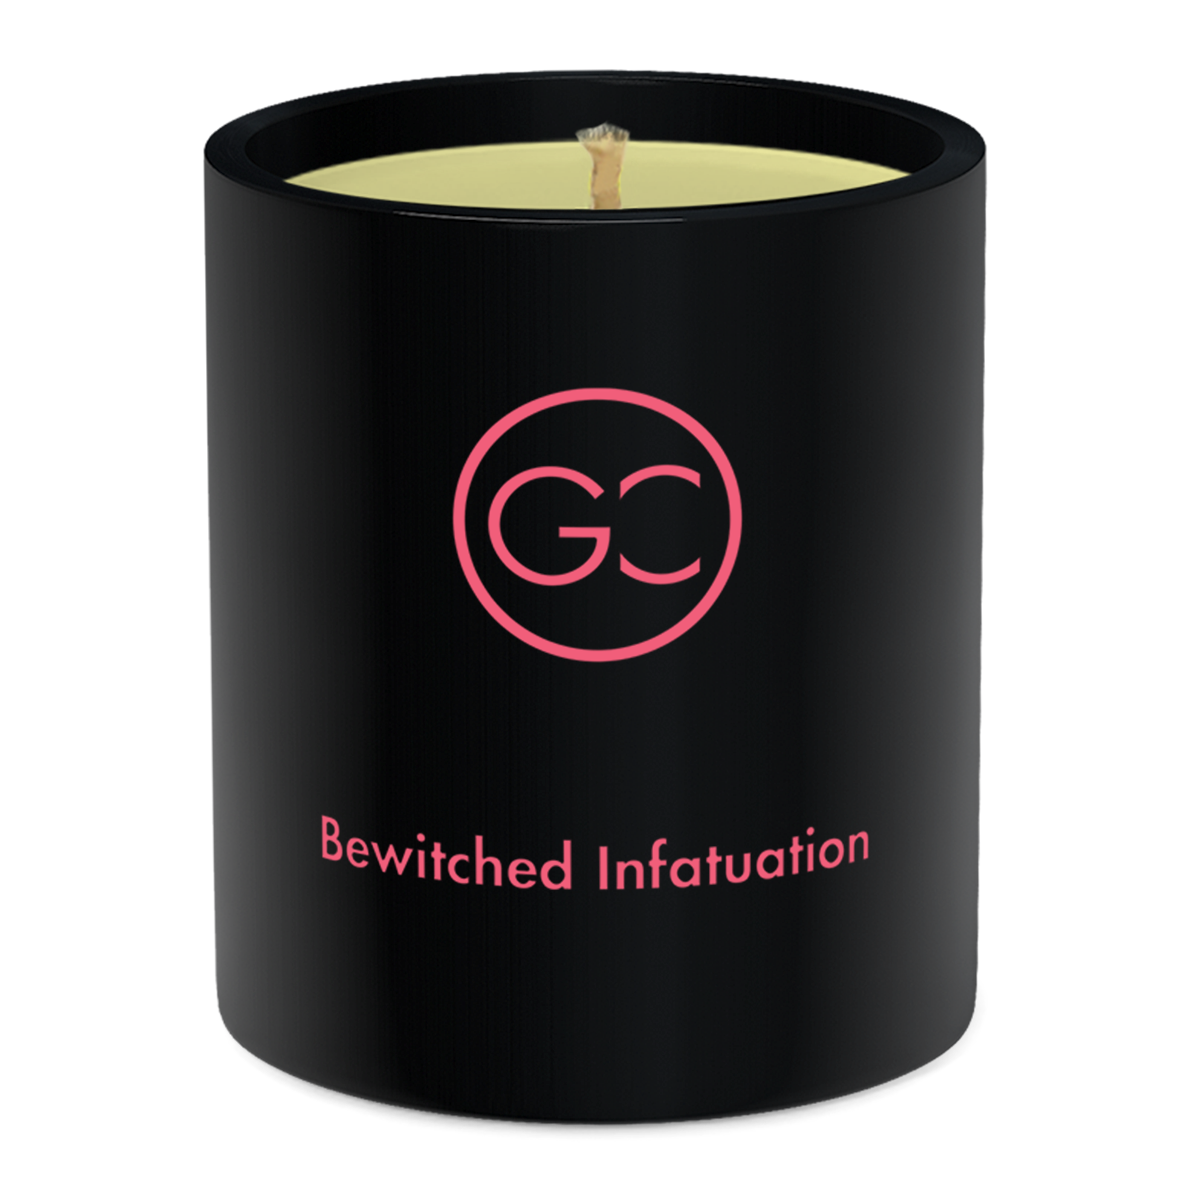 Bewitched Infatuation - Vanilla Bean Scented Soy Candle 55hr Burn